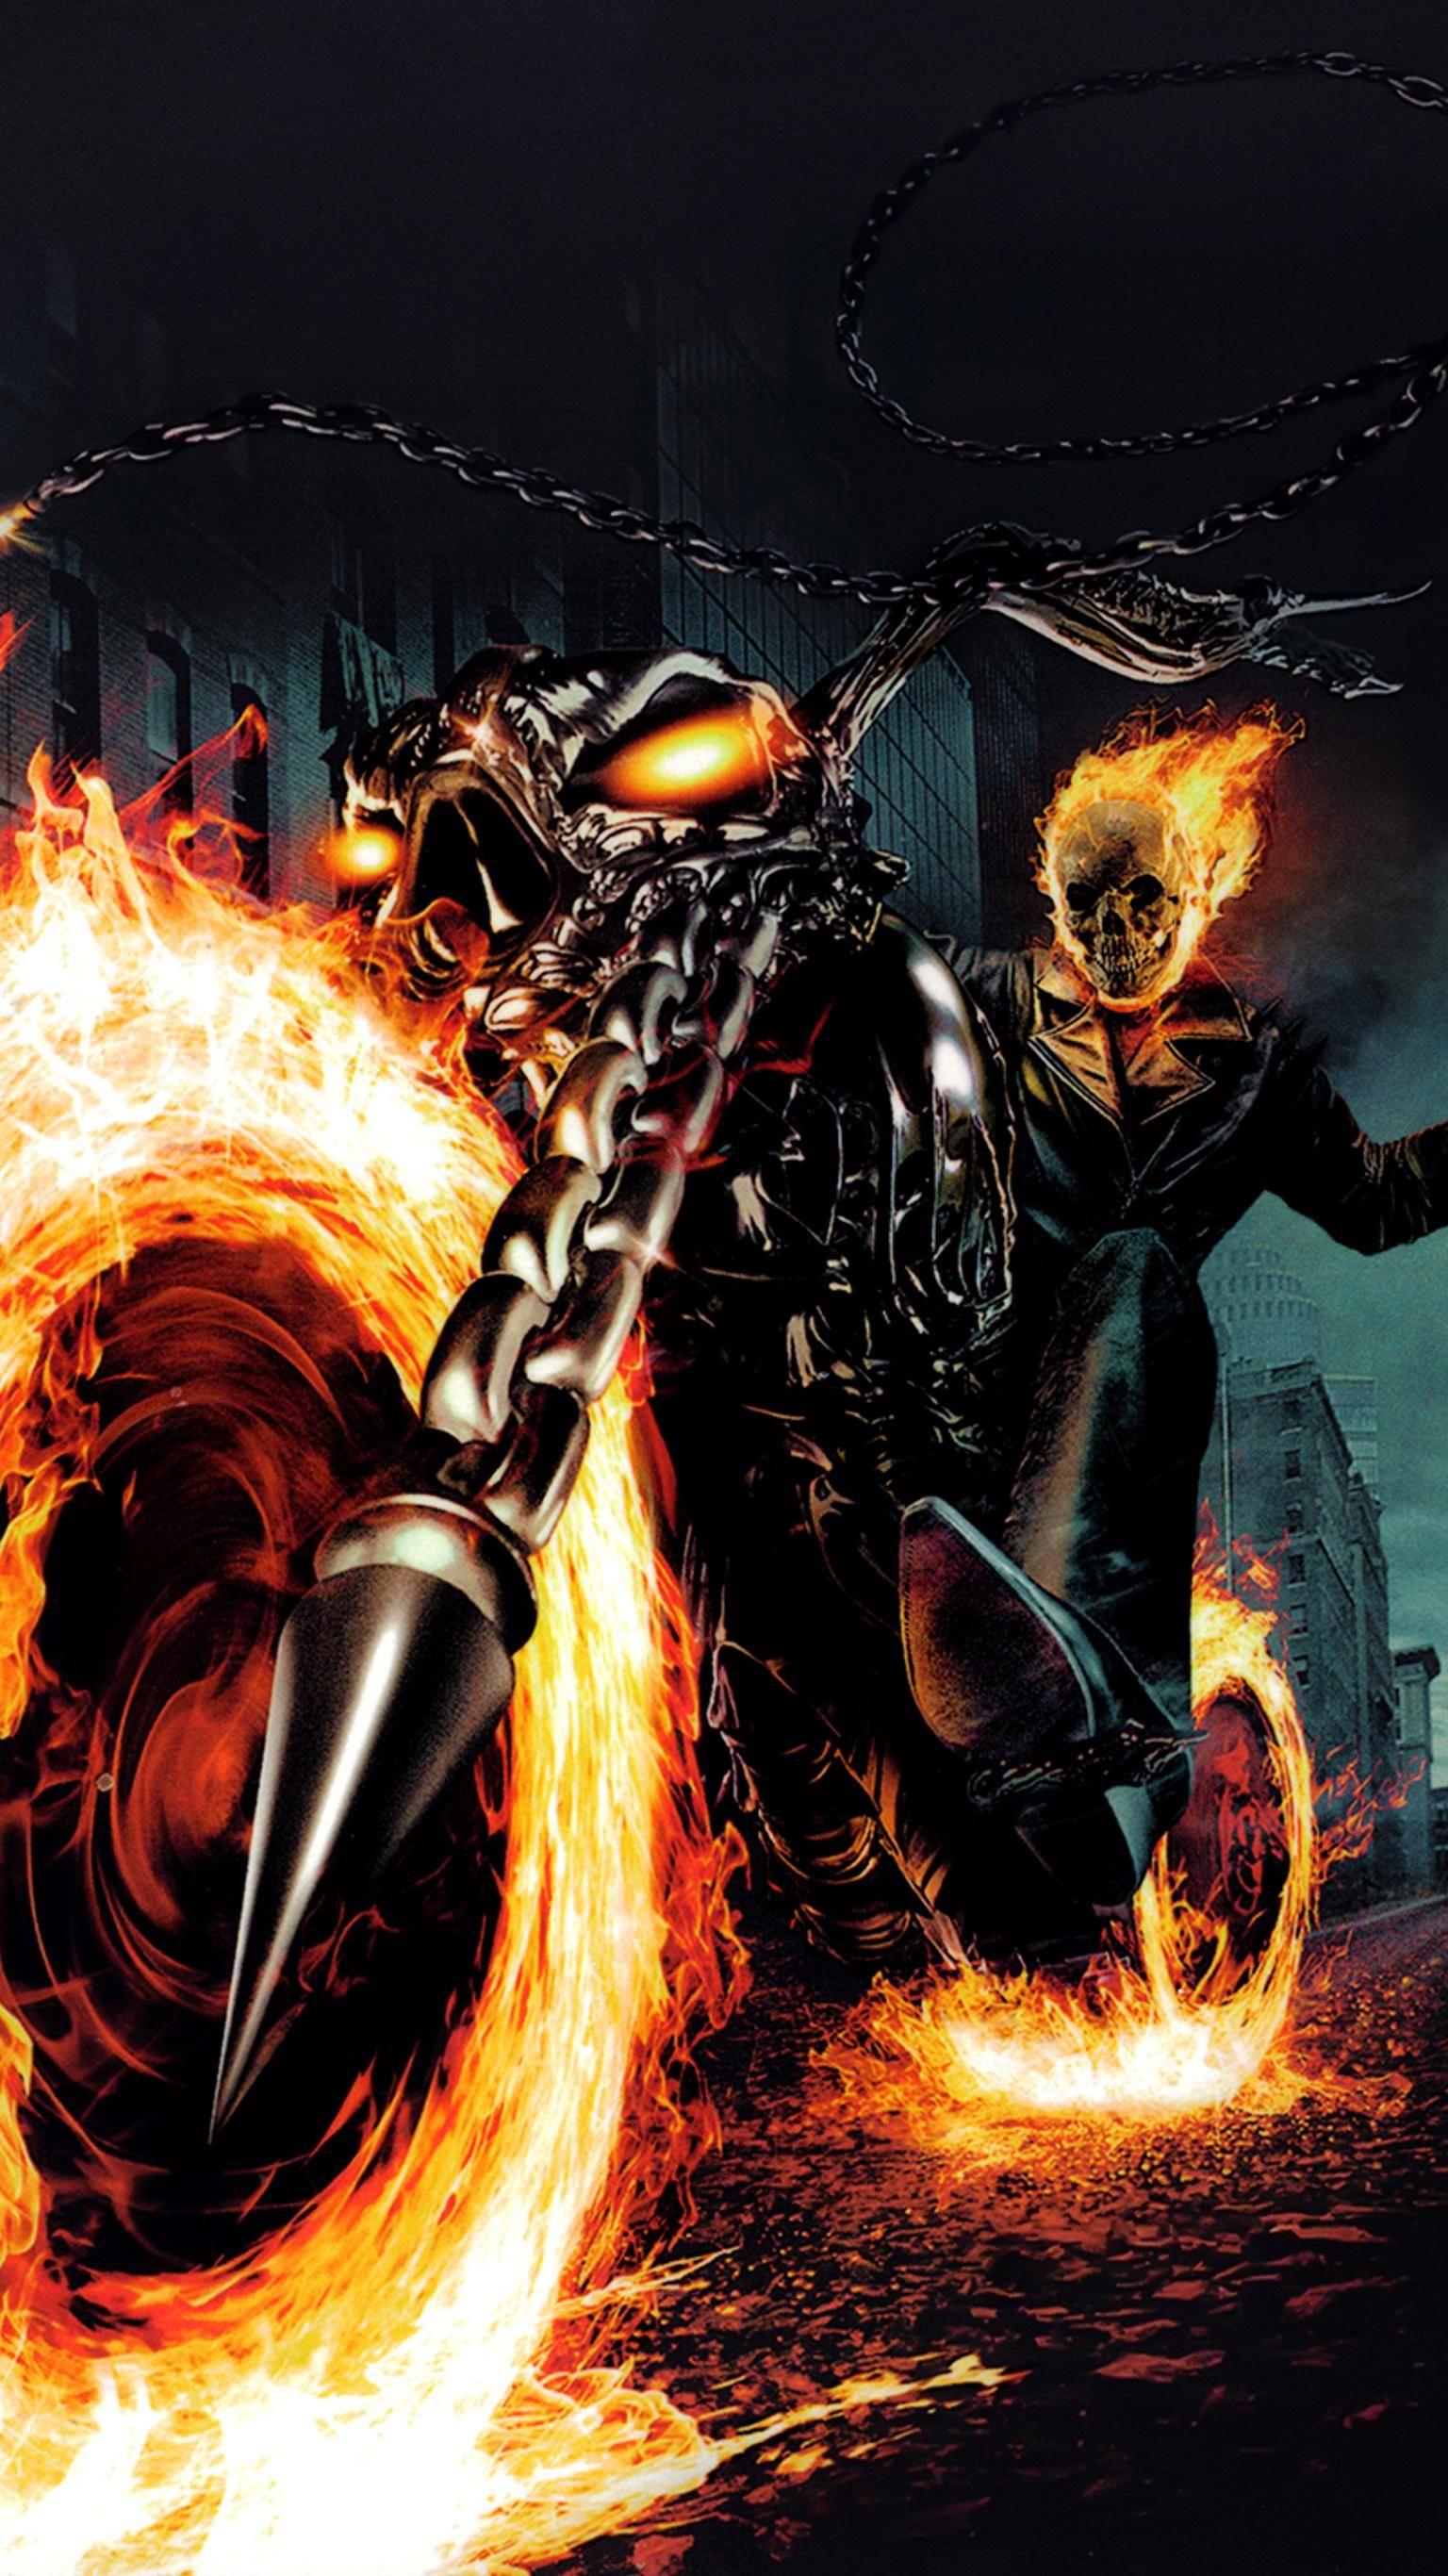 Ghost Rider (2007) Phone Wallpaper. Ghost rider tattoo, Ghost